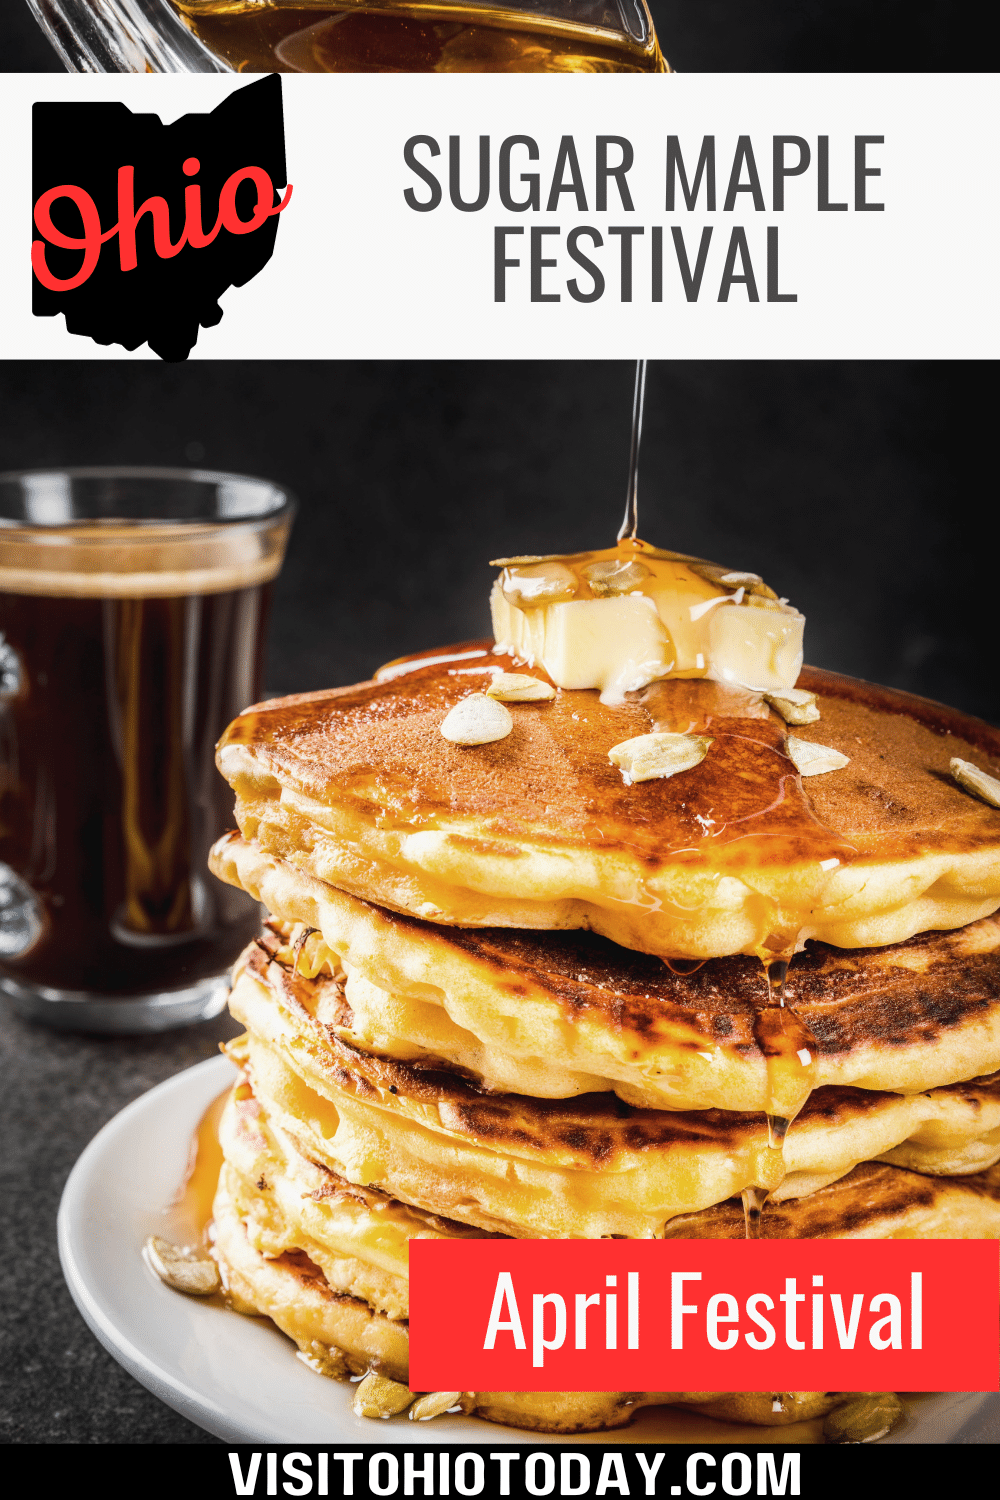 The Sugar Maple Festival is held in mid-April. This annual spring festival celebrates authentic Ohio-made maple syrup with vendors, craftspeople, and live music.